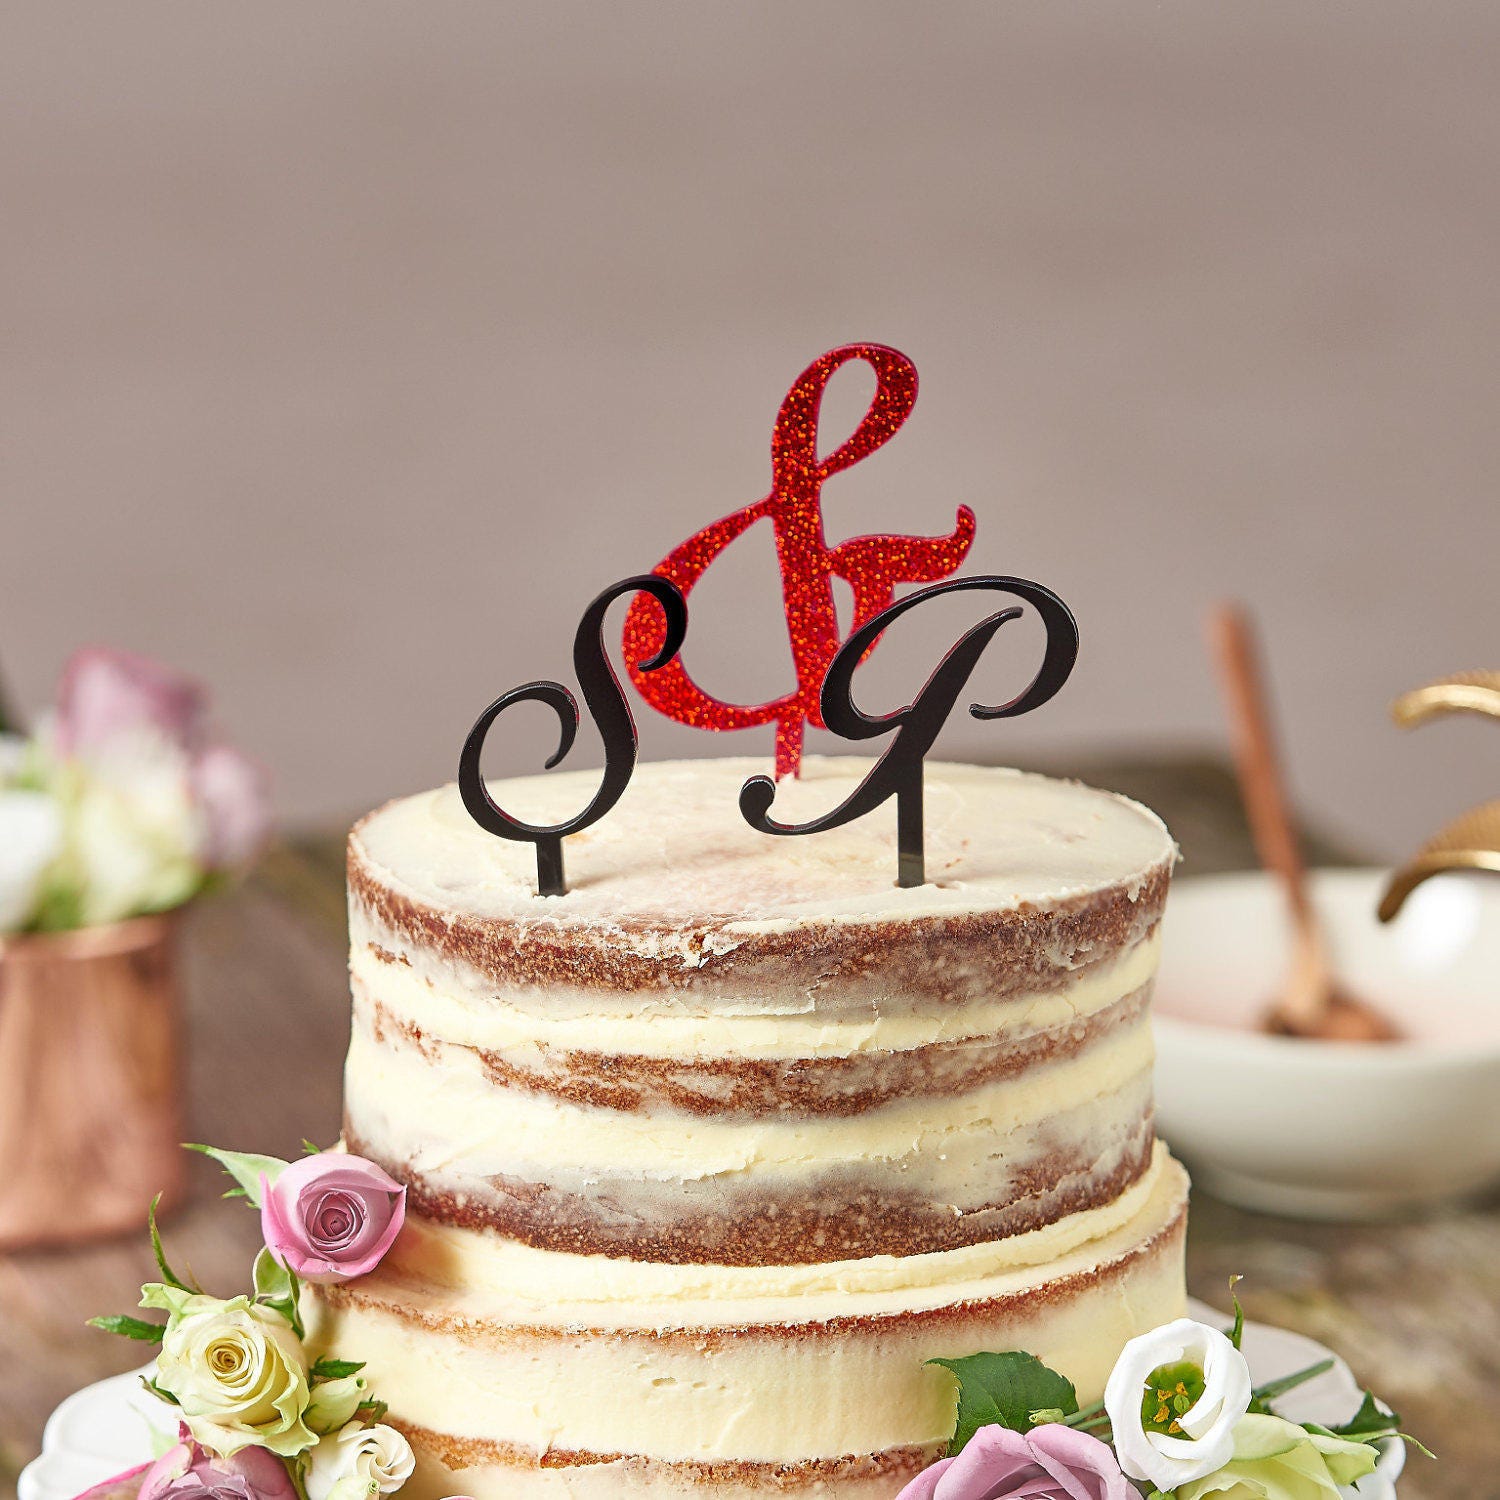 Personalised Initial Wedding Cake Toppers-Personalised wedding cake decoration-Wedding cake topper with personalised initials-personalised